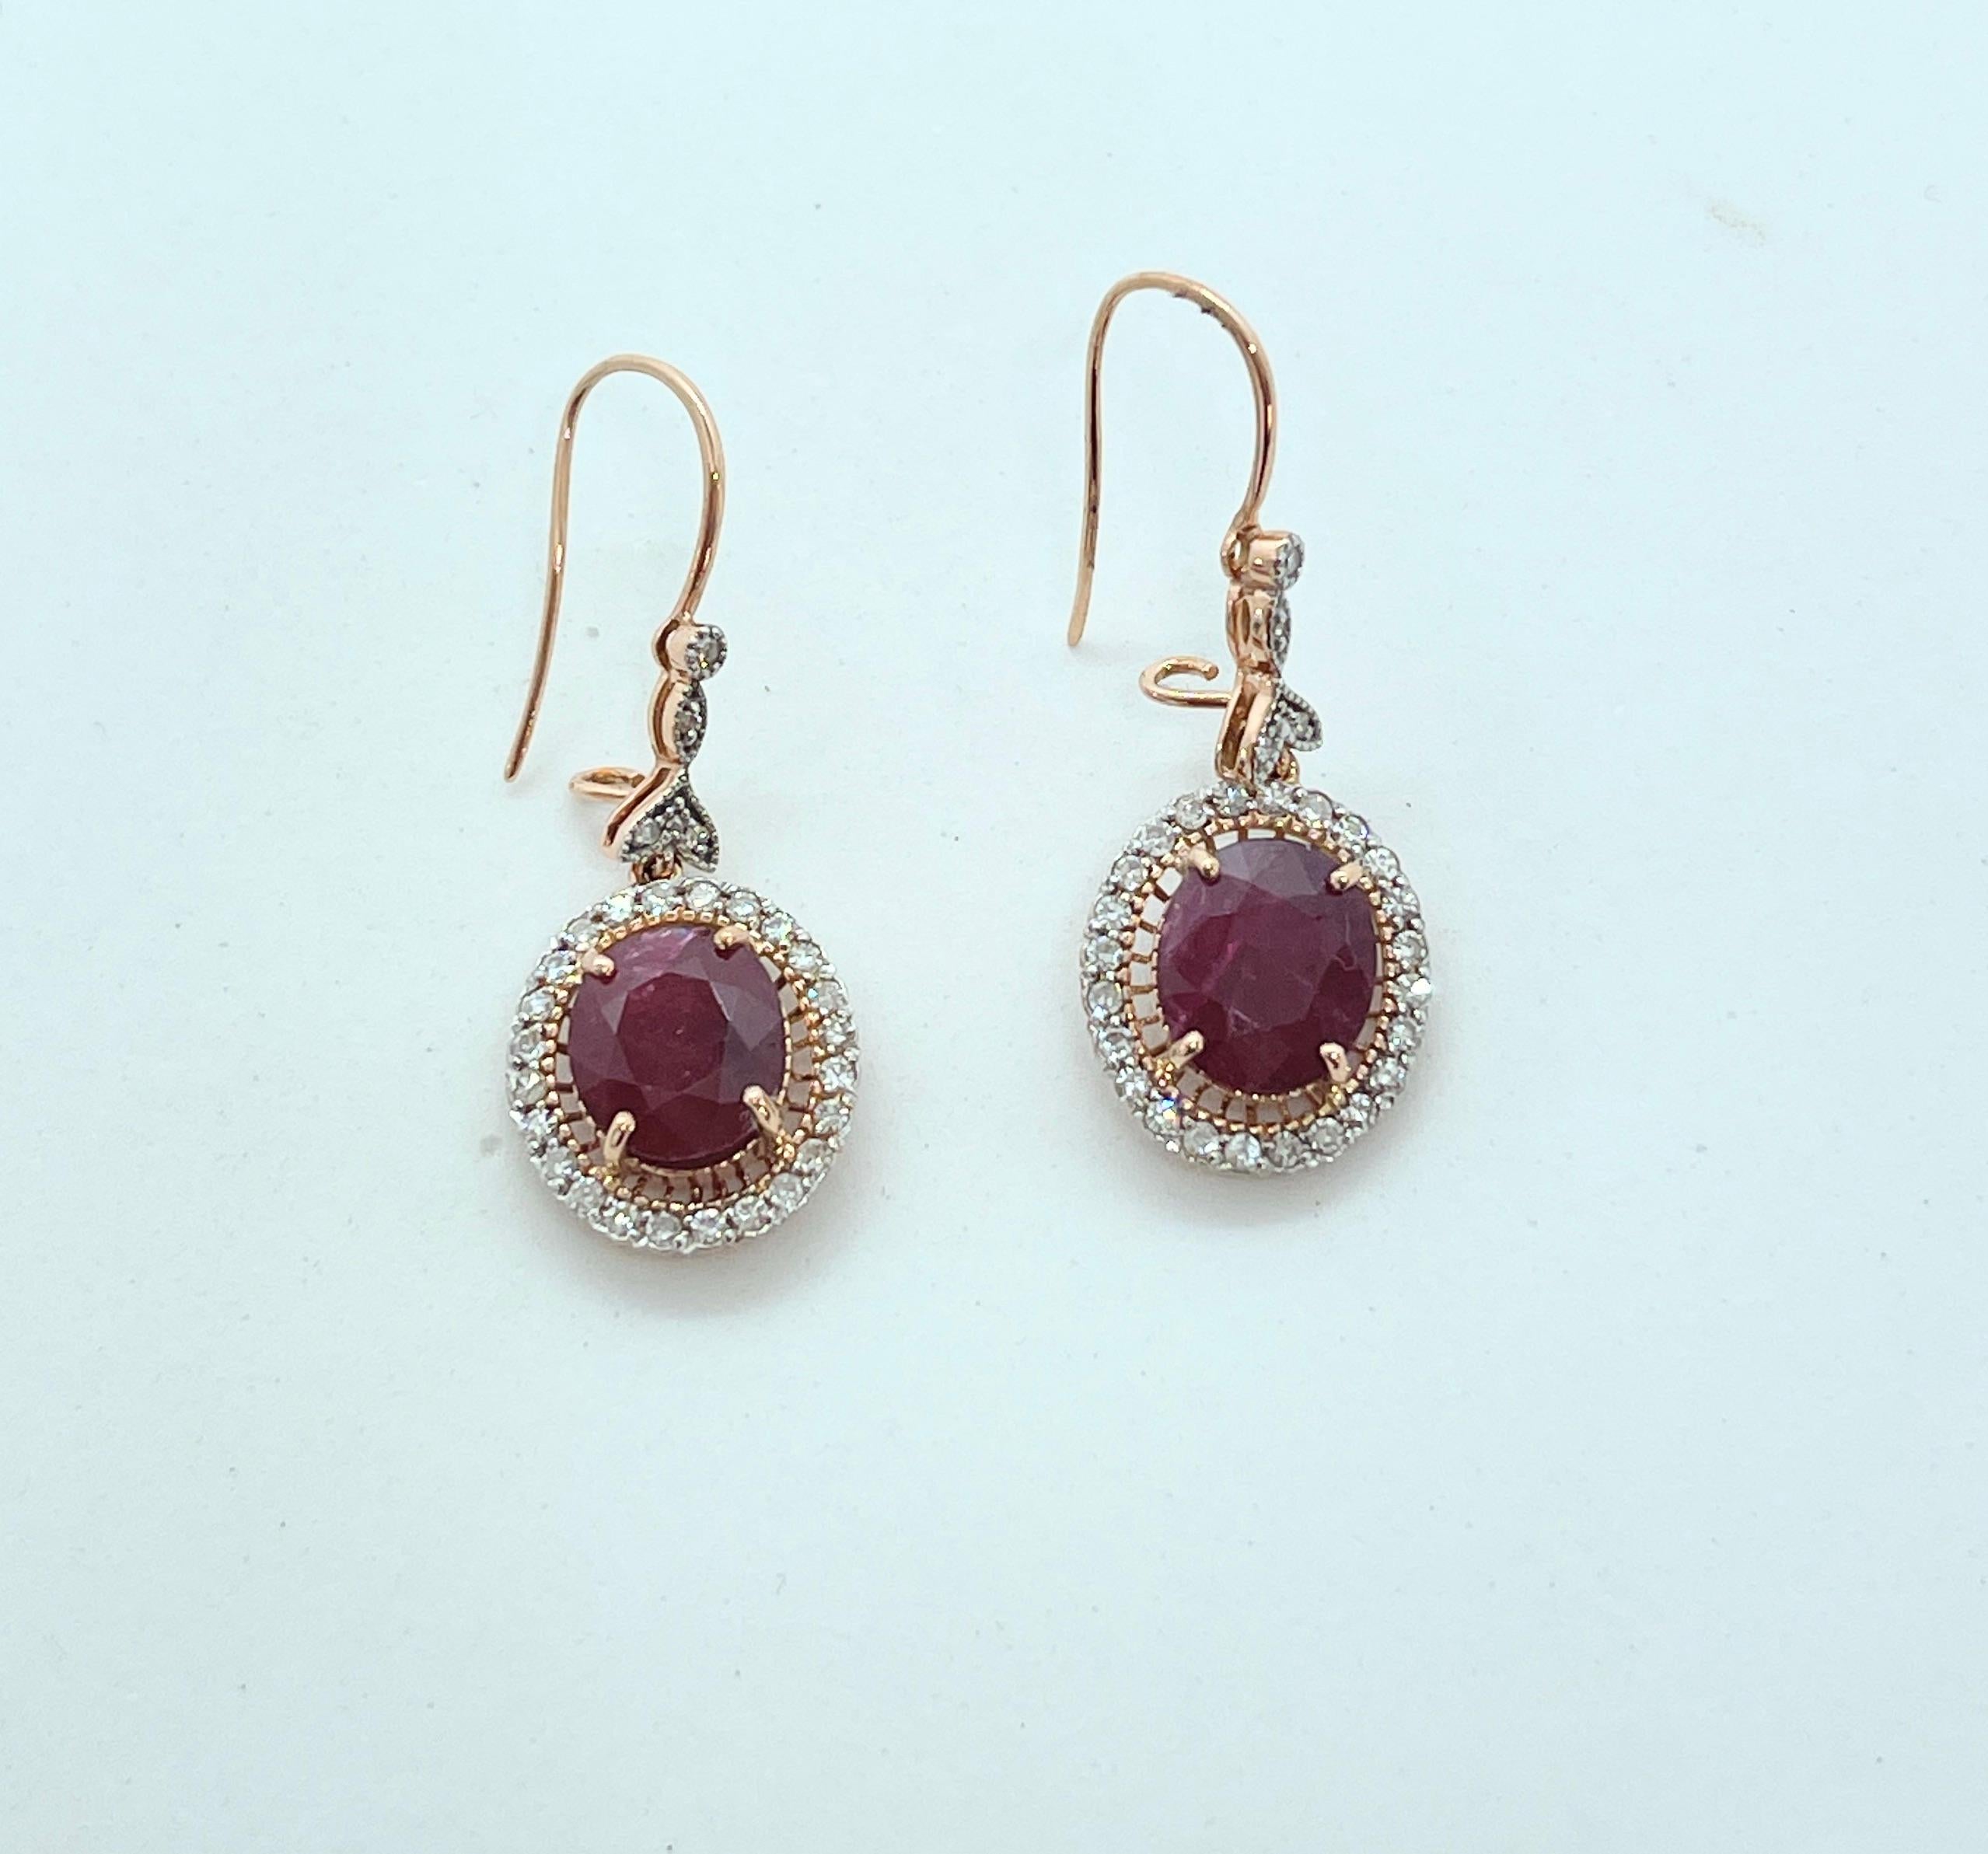 Stylish and elegant, these earrings feature Oval shaped Rubies surrounded with genuine, earth mined Diamonds. The earrings are set in 14ct rose gold and dangle on shepherd hooks with a safety hook to the rear.  They are a nice size that would be